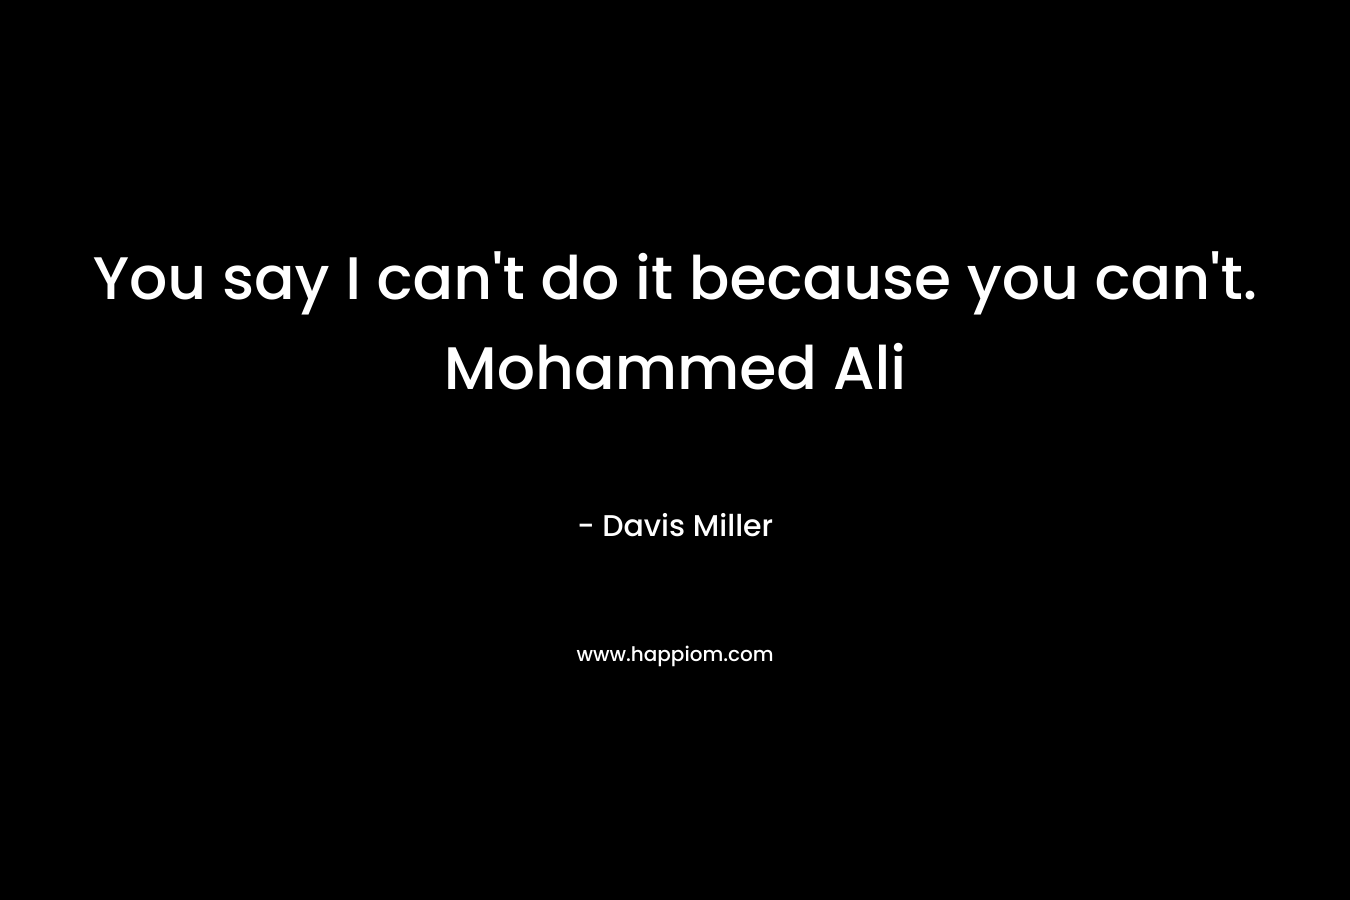 You say I can't do it because you can't. Mohammed Ali